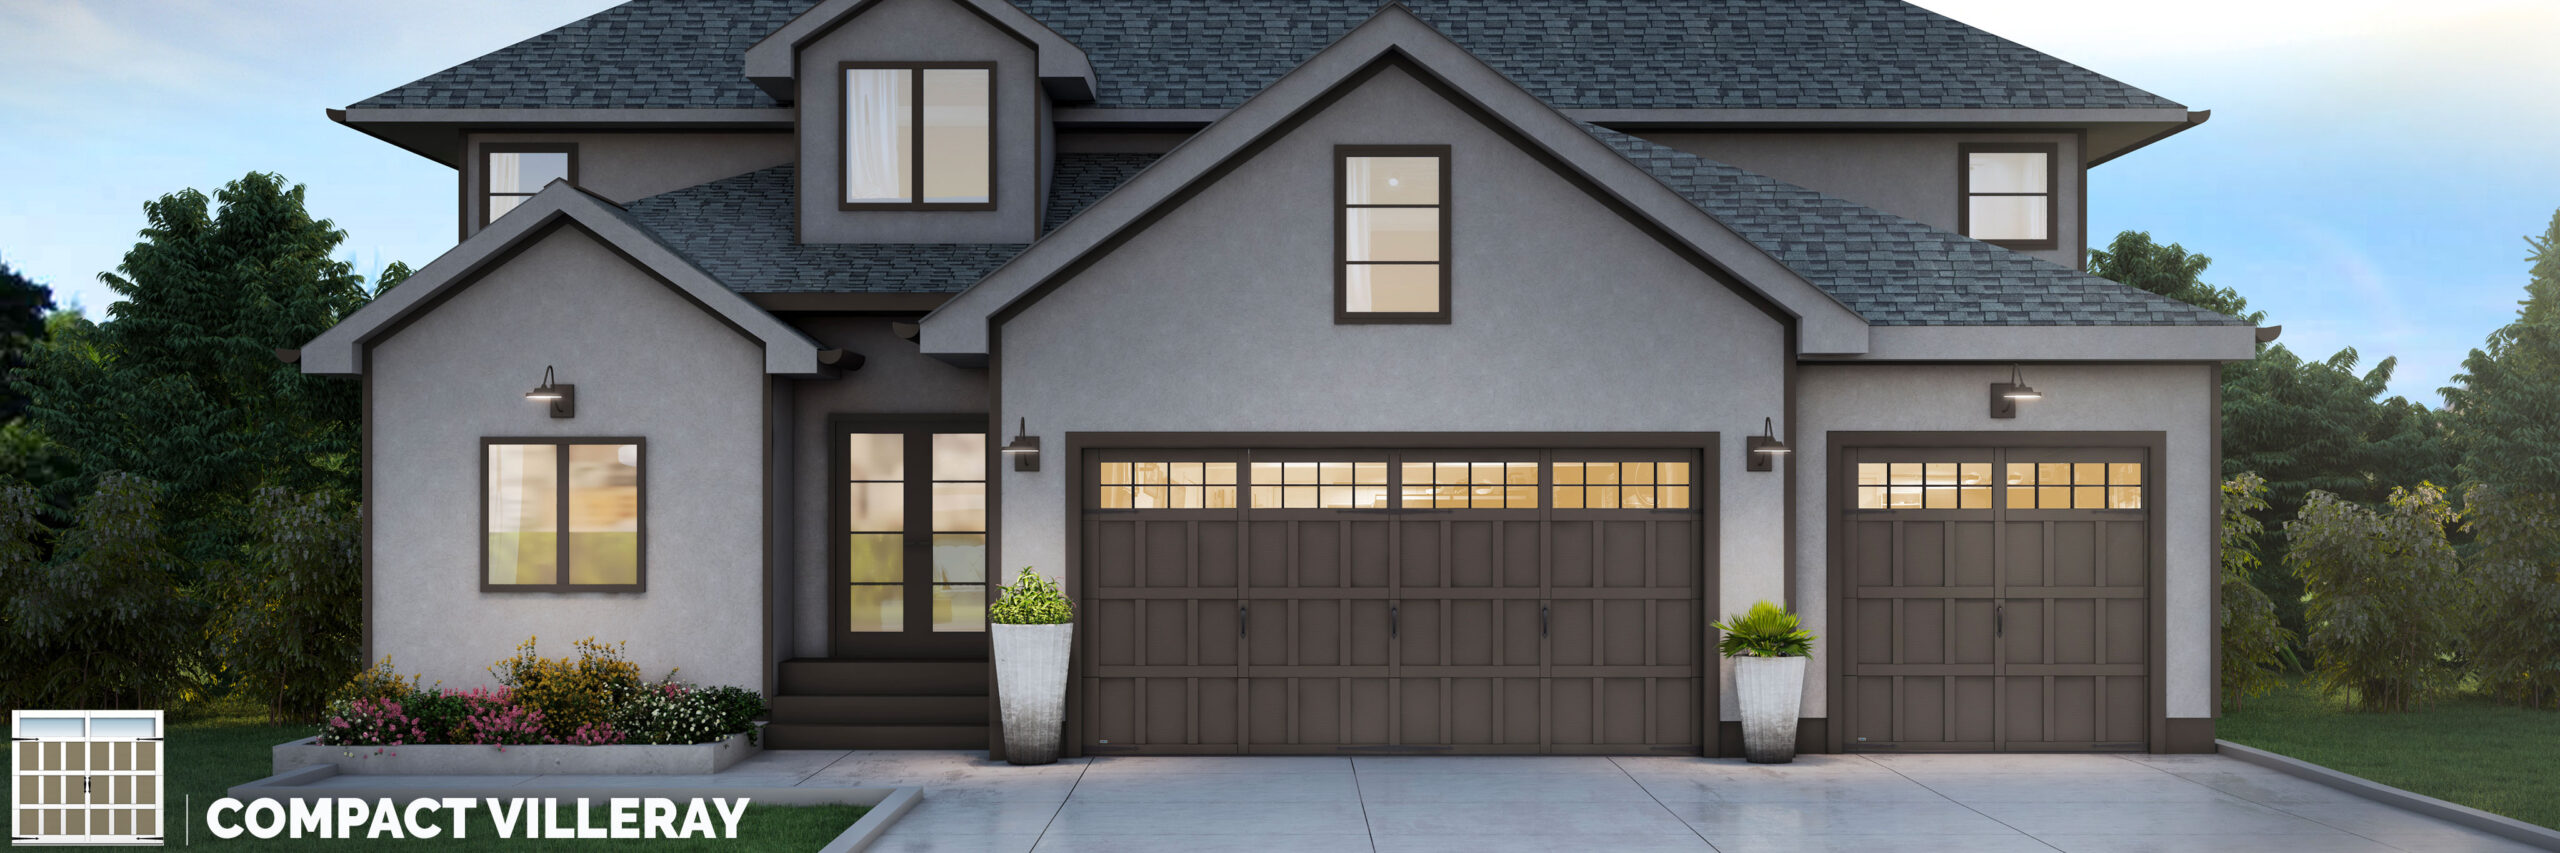 compact villeray carriage house style garage door by garex scaled